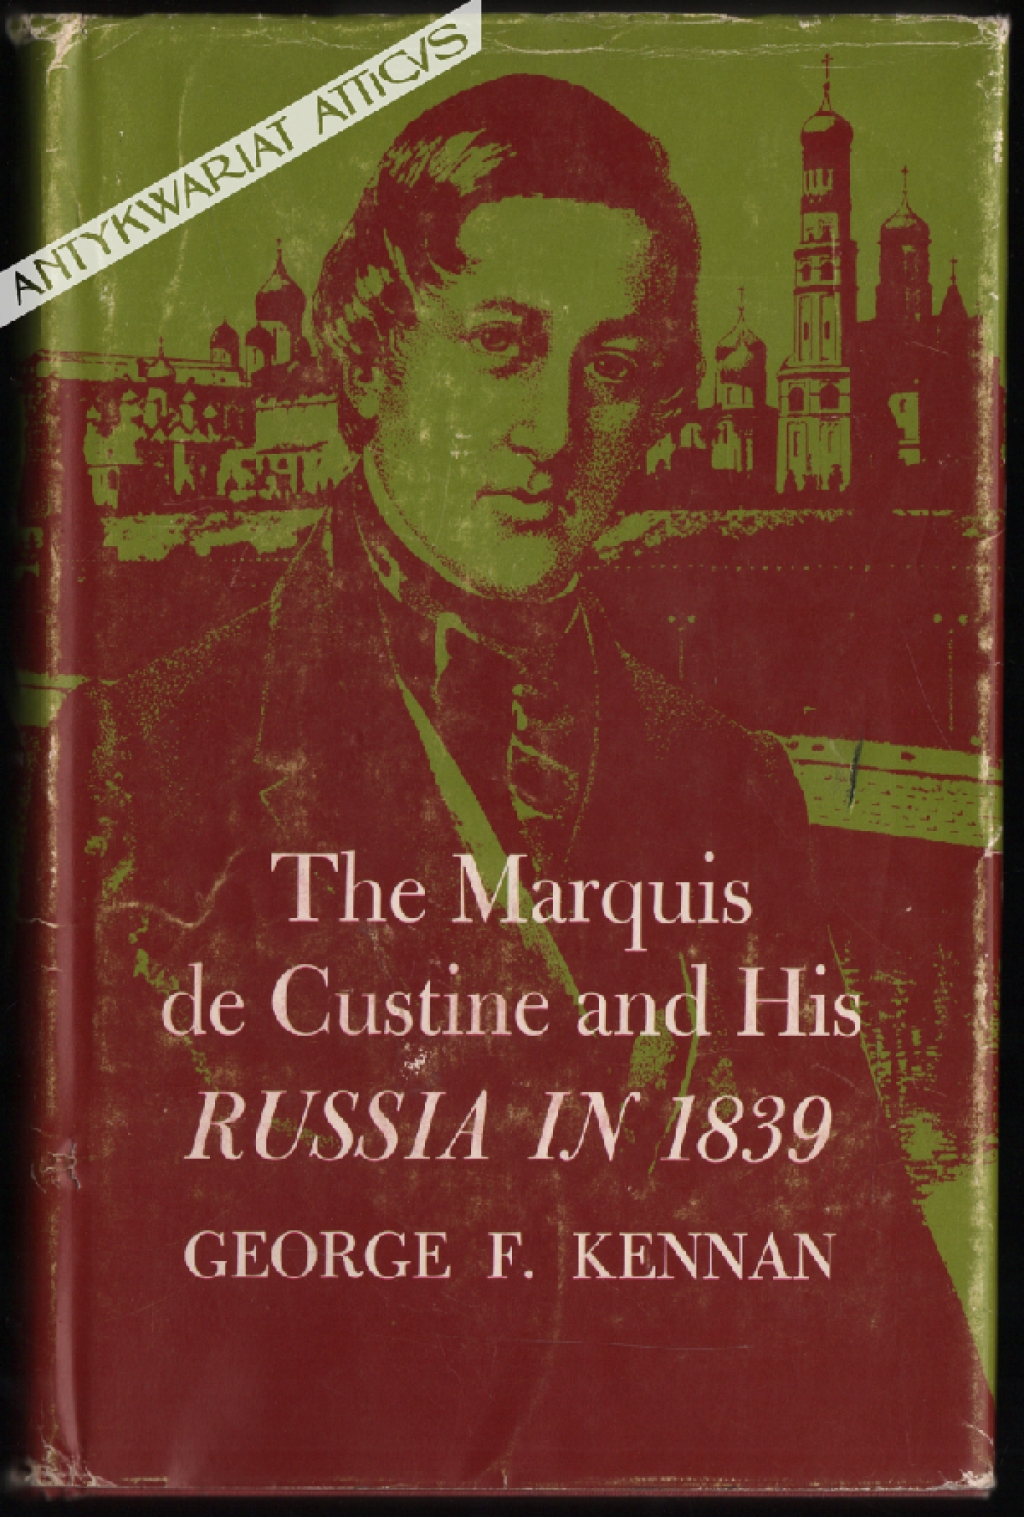 The Marquis de Custine and His Russia in 1839